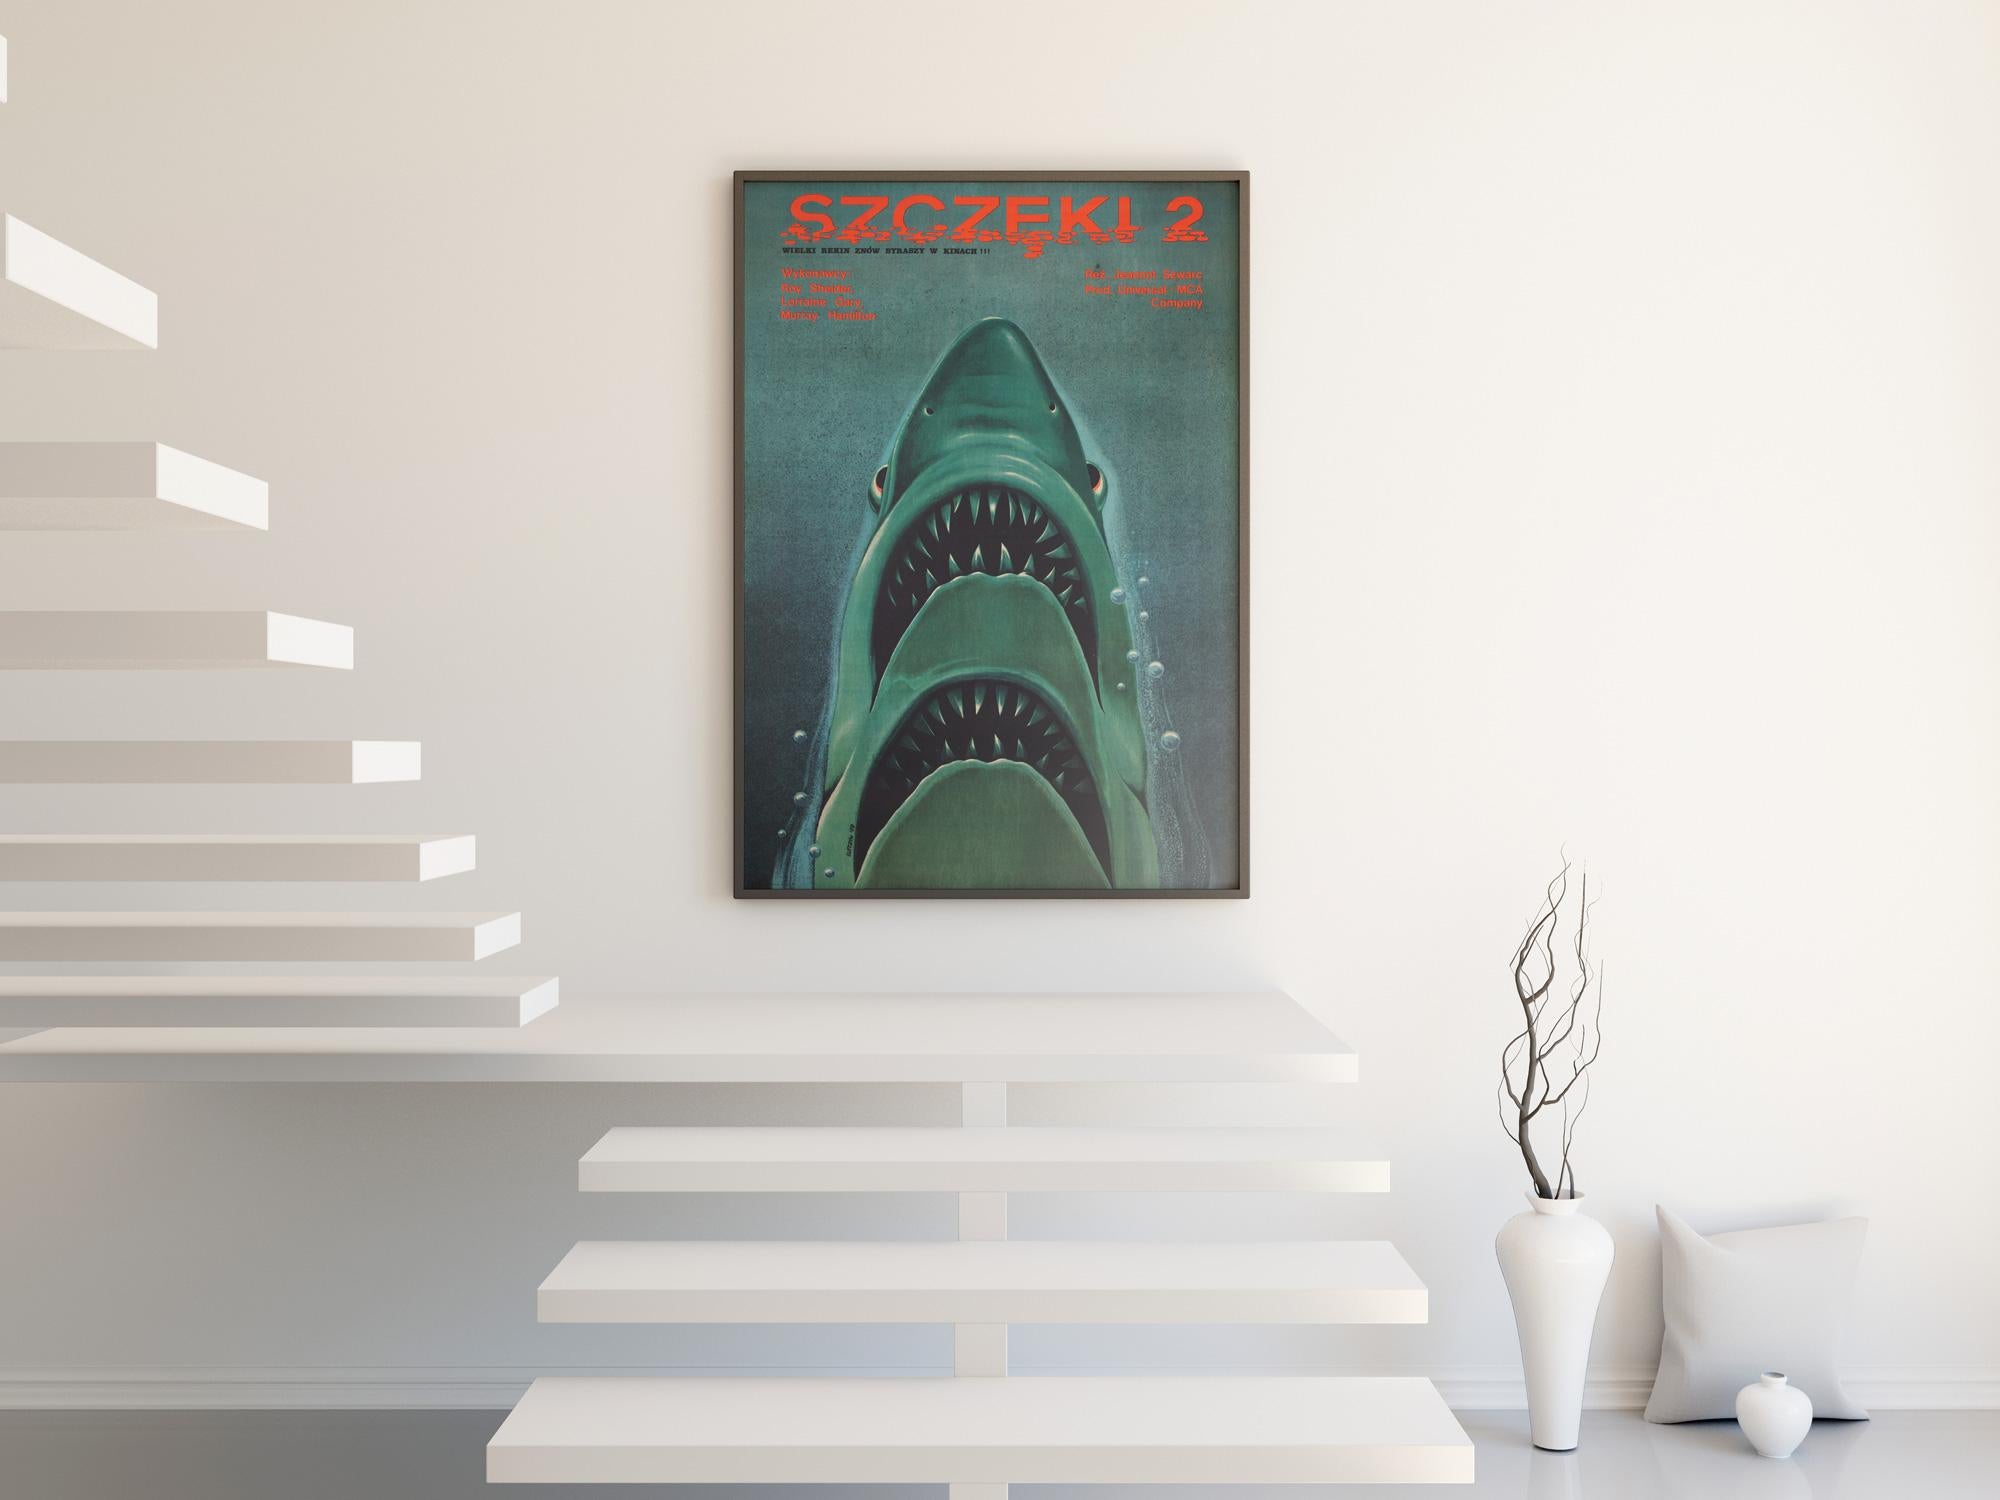 The poster with plenty of bite. Double in fact!

We adore Edward Lutczyn's wonderful double-jawed shark design on the Polish film poster for the Jaws sequel. A very inventive derivative from Kastel's original design for the first film.

The end